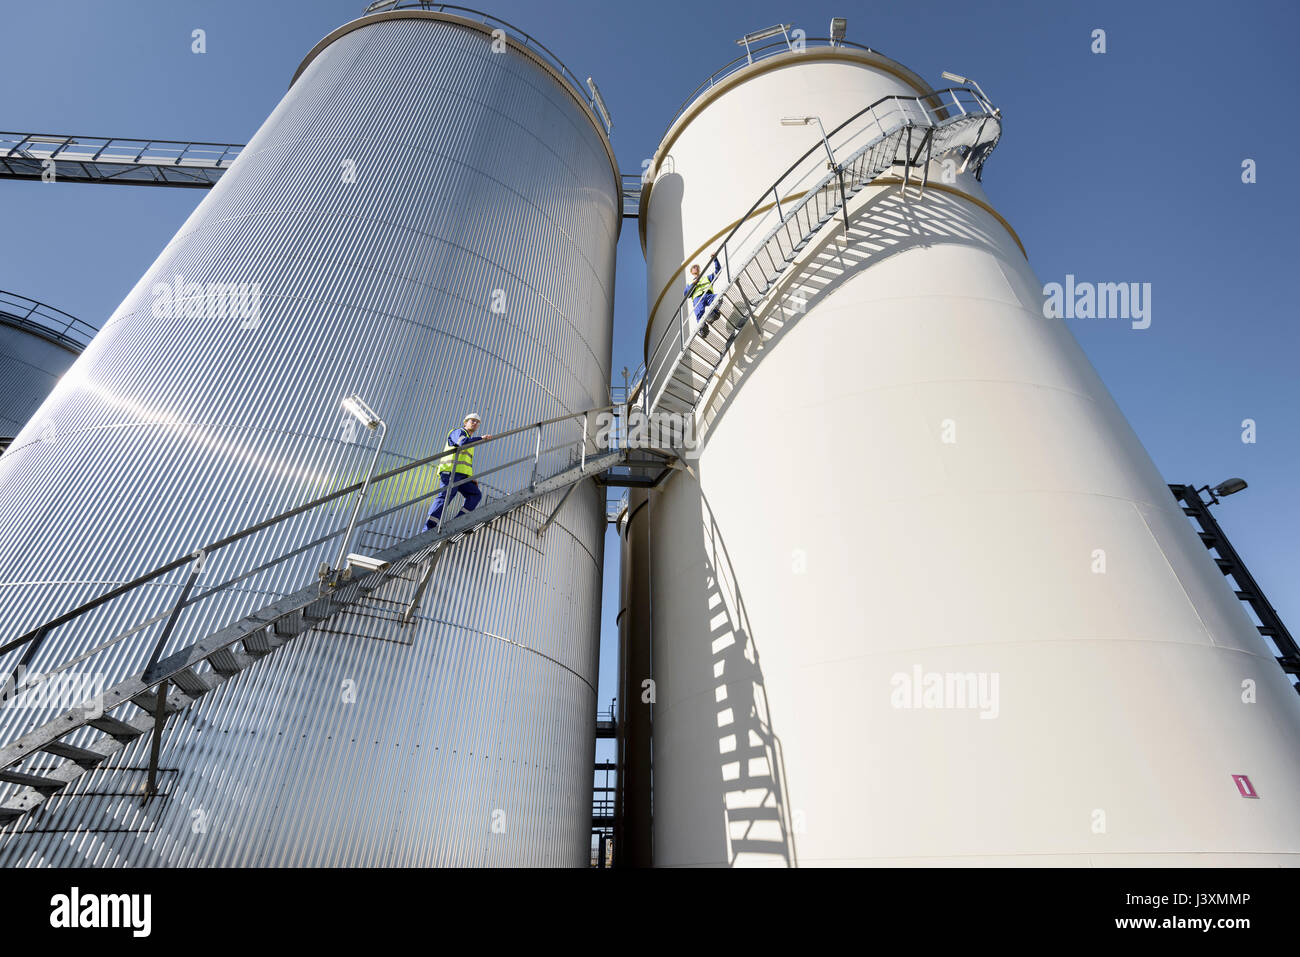 Workers climbing oil storage tanks in oil blending factory Stock Photo